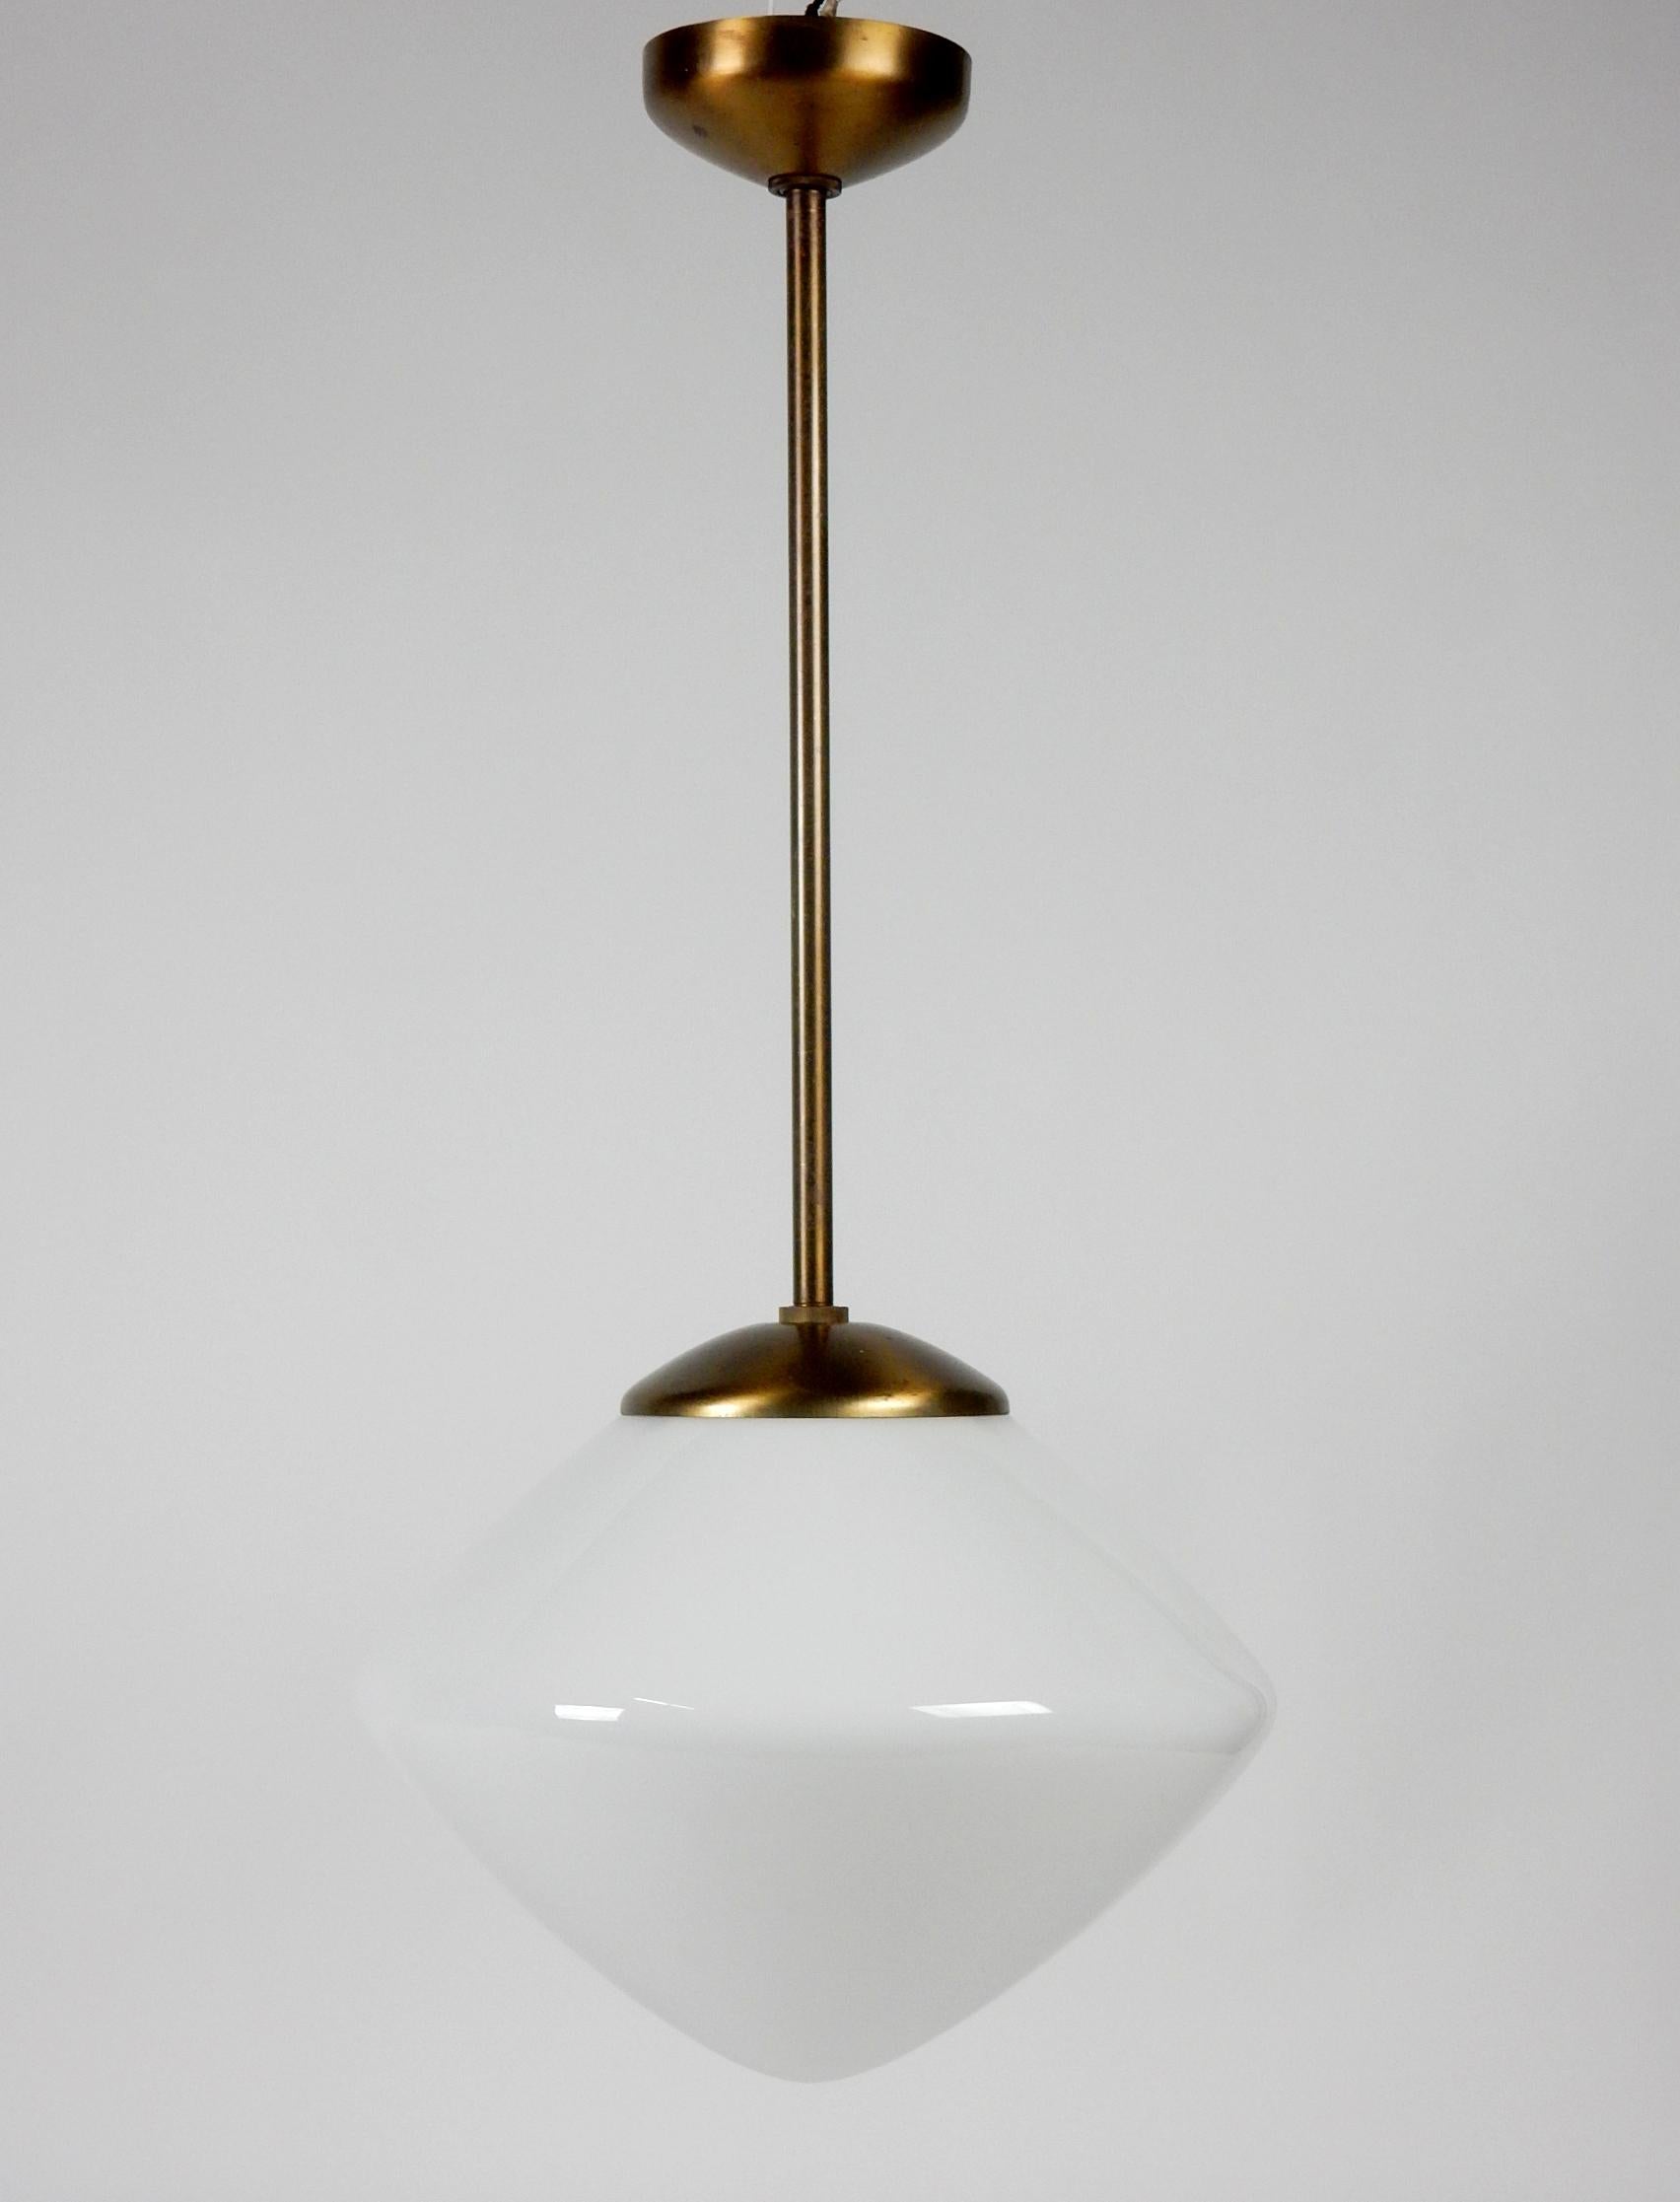 Modernist pendant lamp by The Miller Company of Connecticut.
6 WERE available however only 2 smaller with long drop are available.
In the style of Paavo Tynell design with smooth clean lines.
Original thin hand spun milk glass shade.
Brass tone